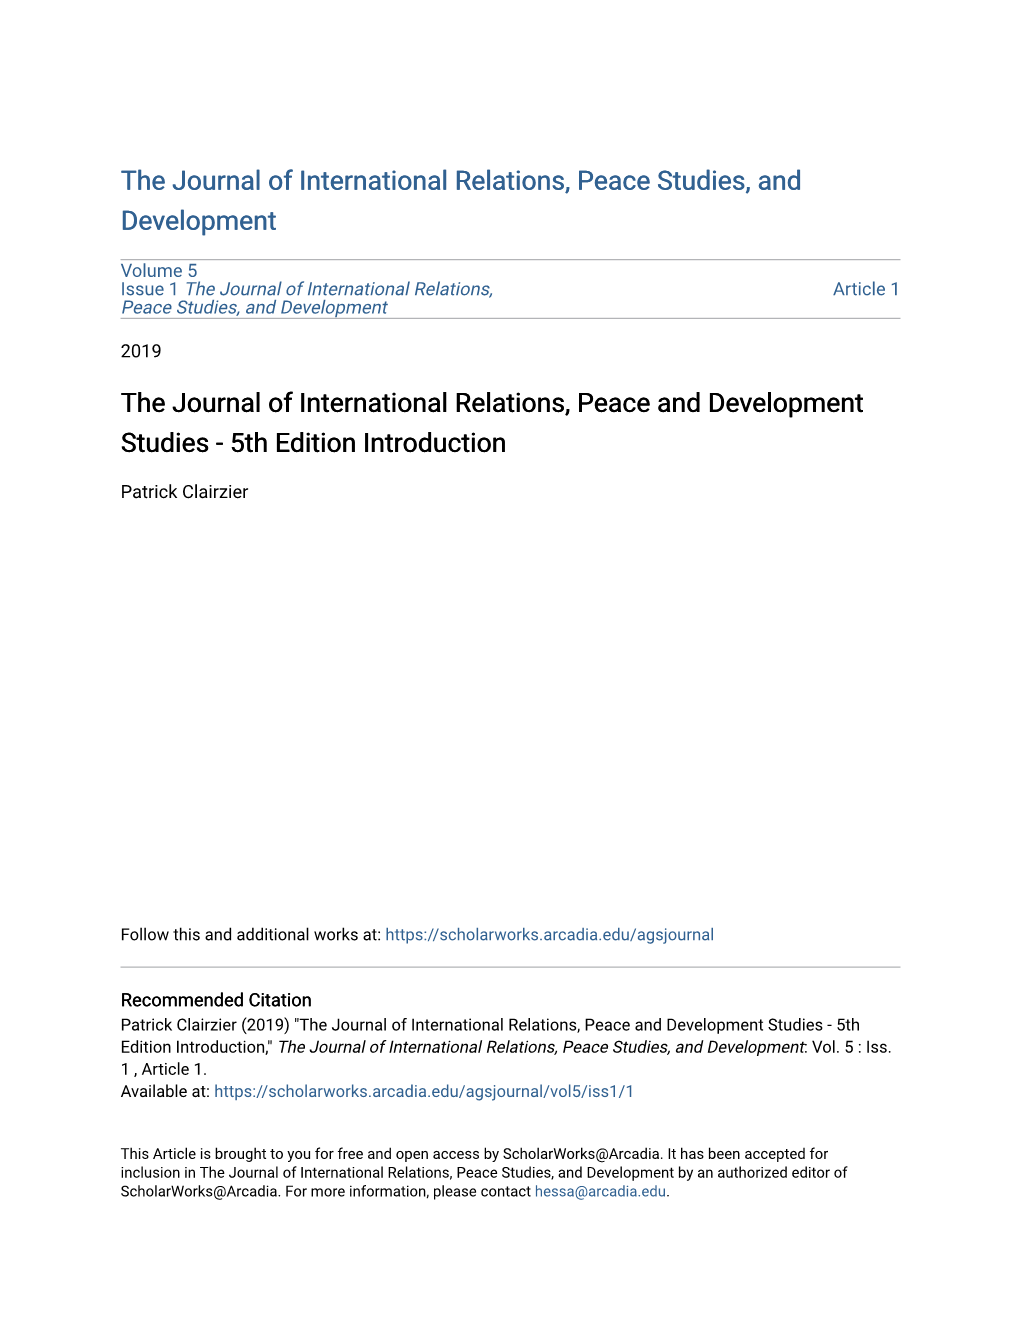 The Journal of International Relations, Peace Studies, and Development